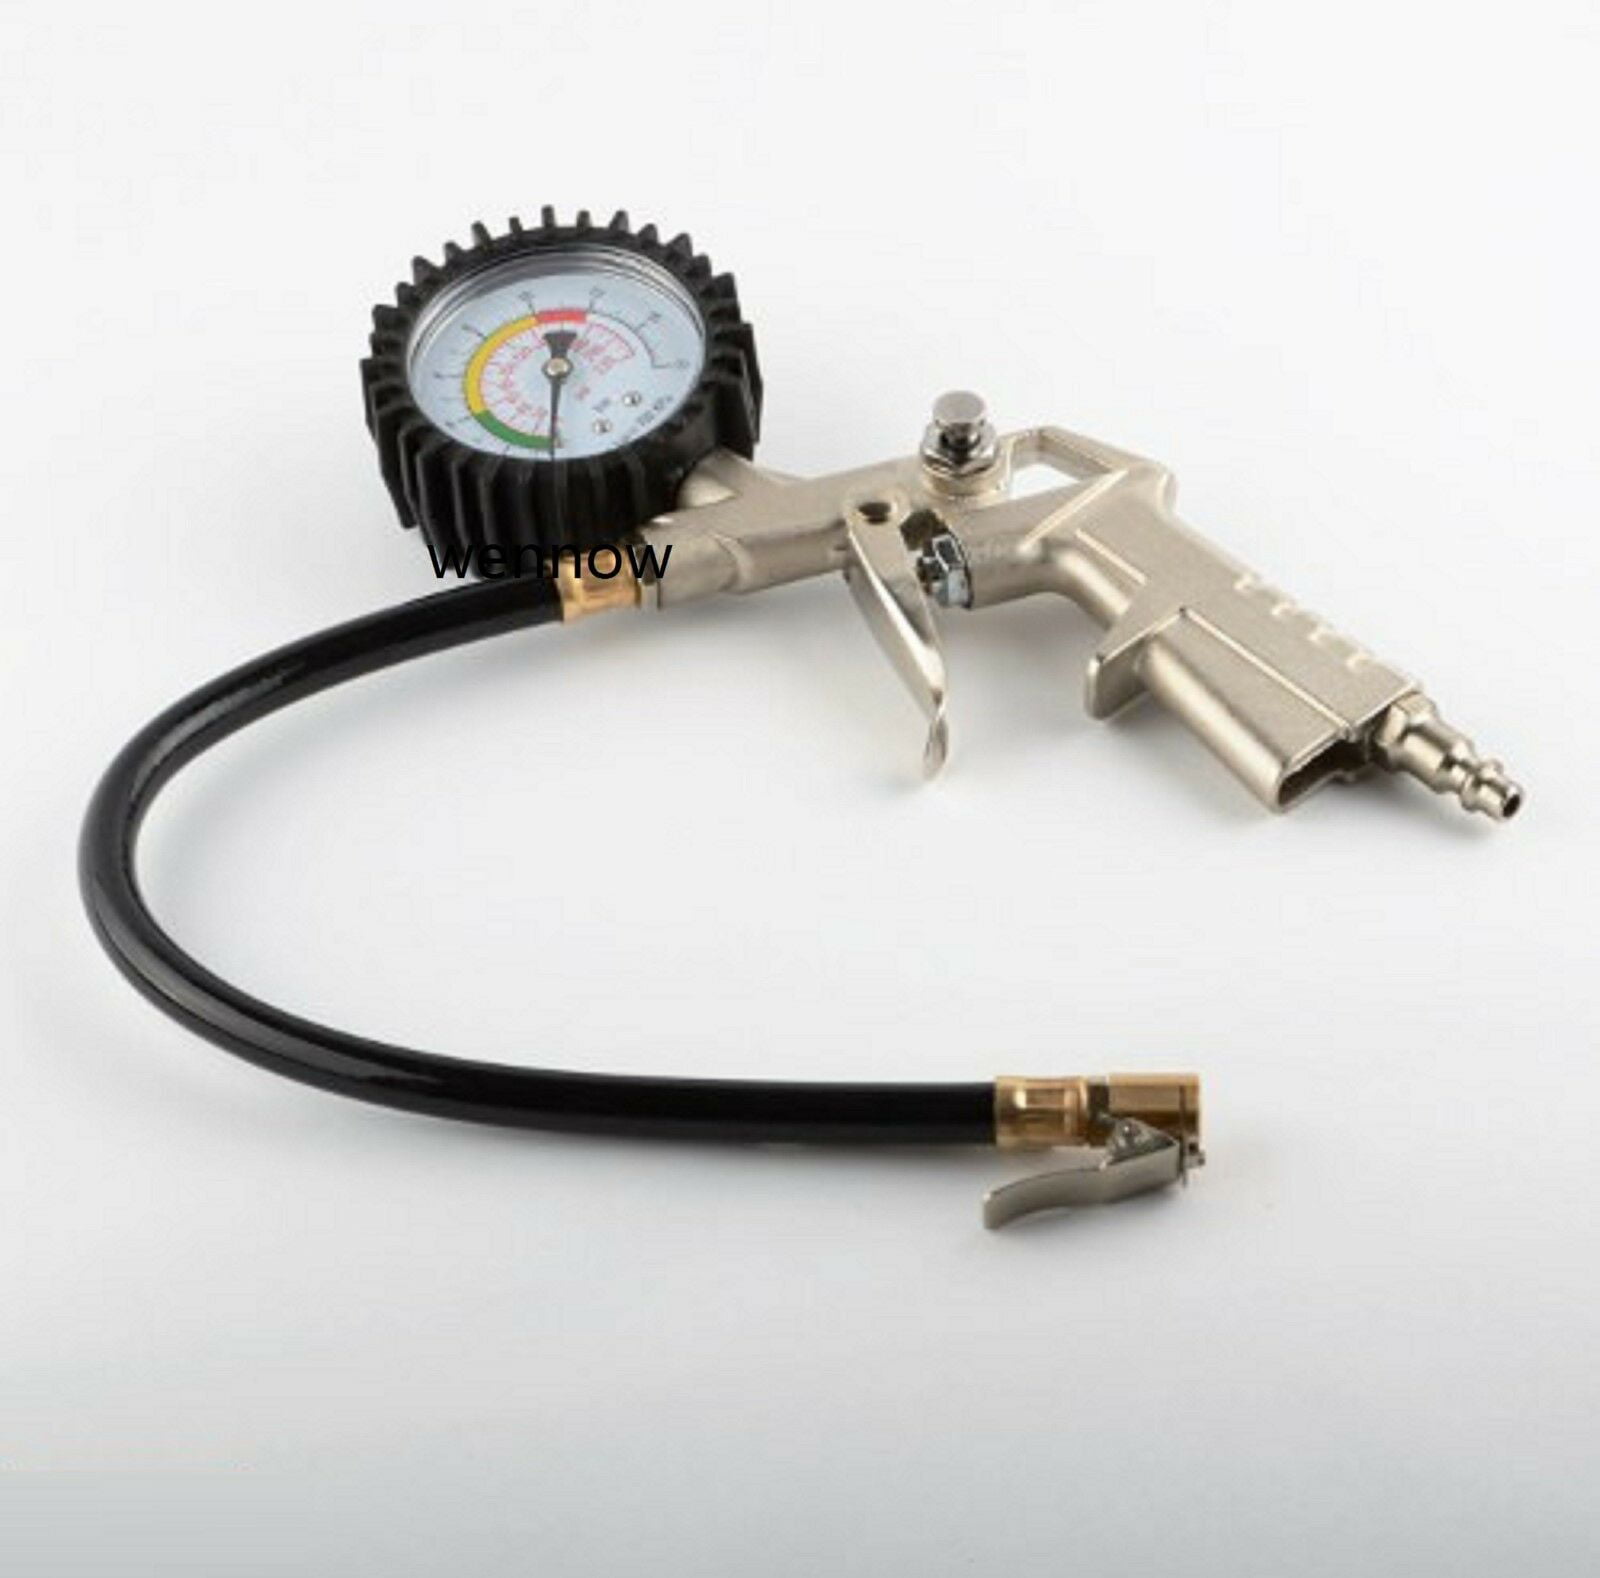 Details about   o220 PSI Pistol-Type Air Chuck With Dial Tire Inflator Gauge Flexible Hose 